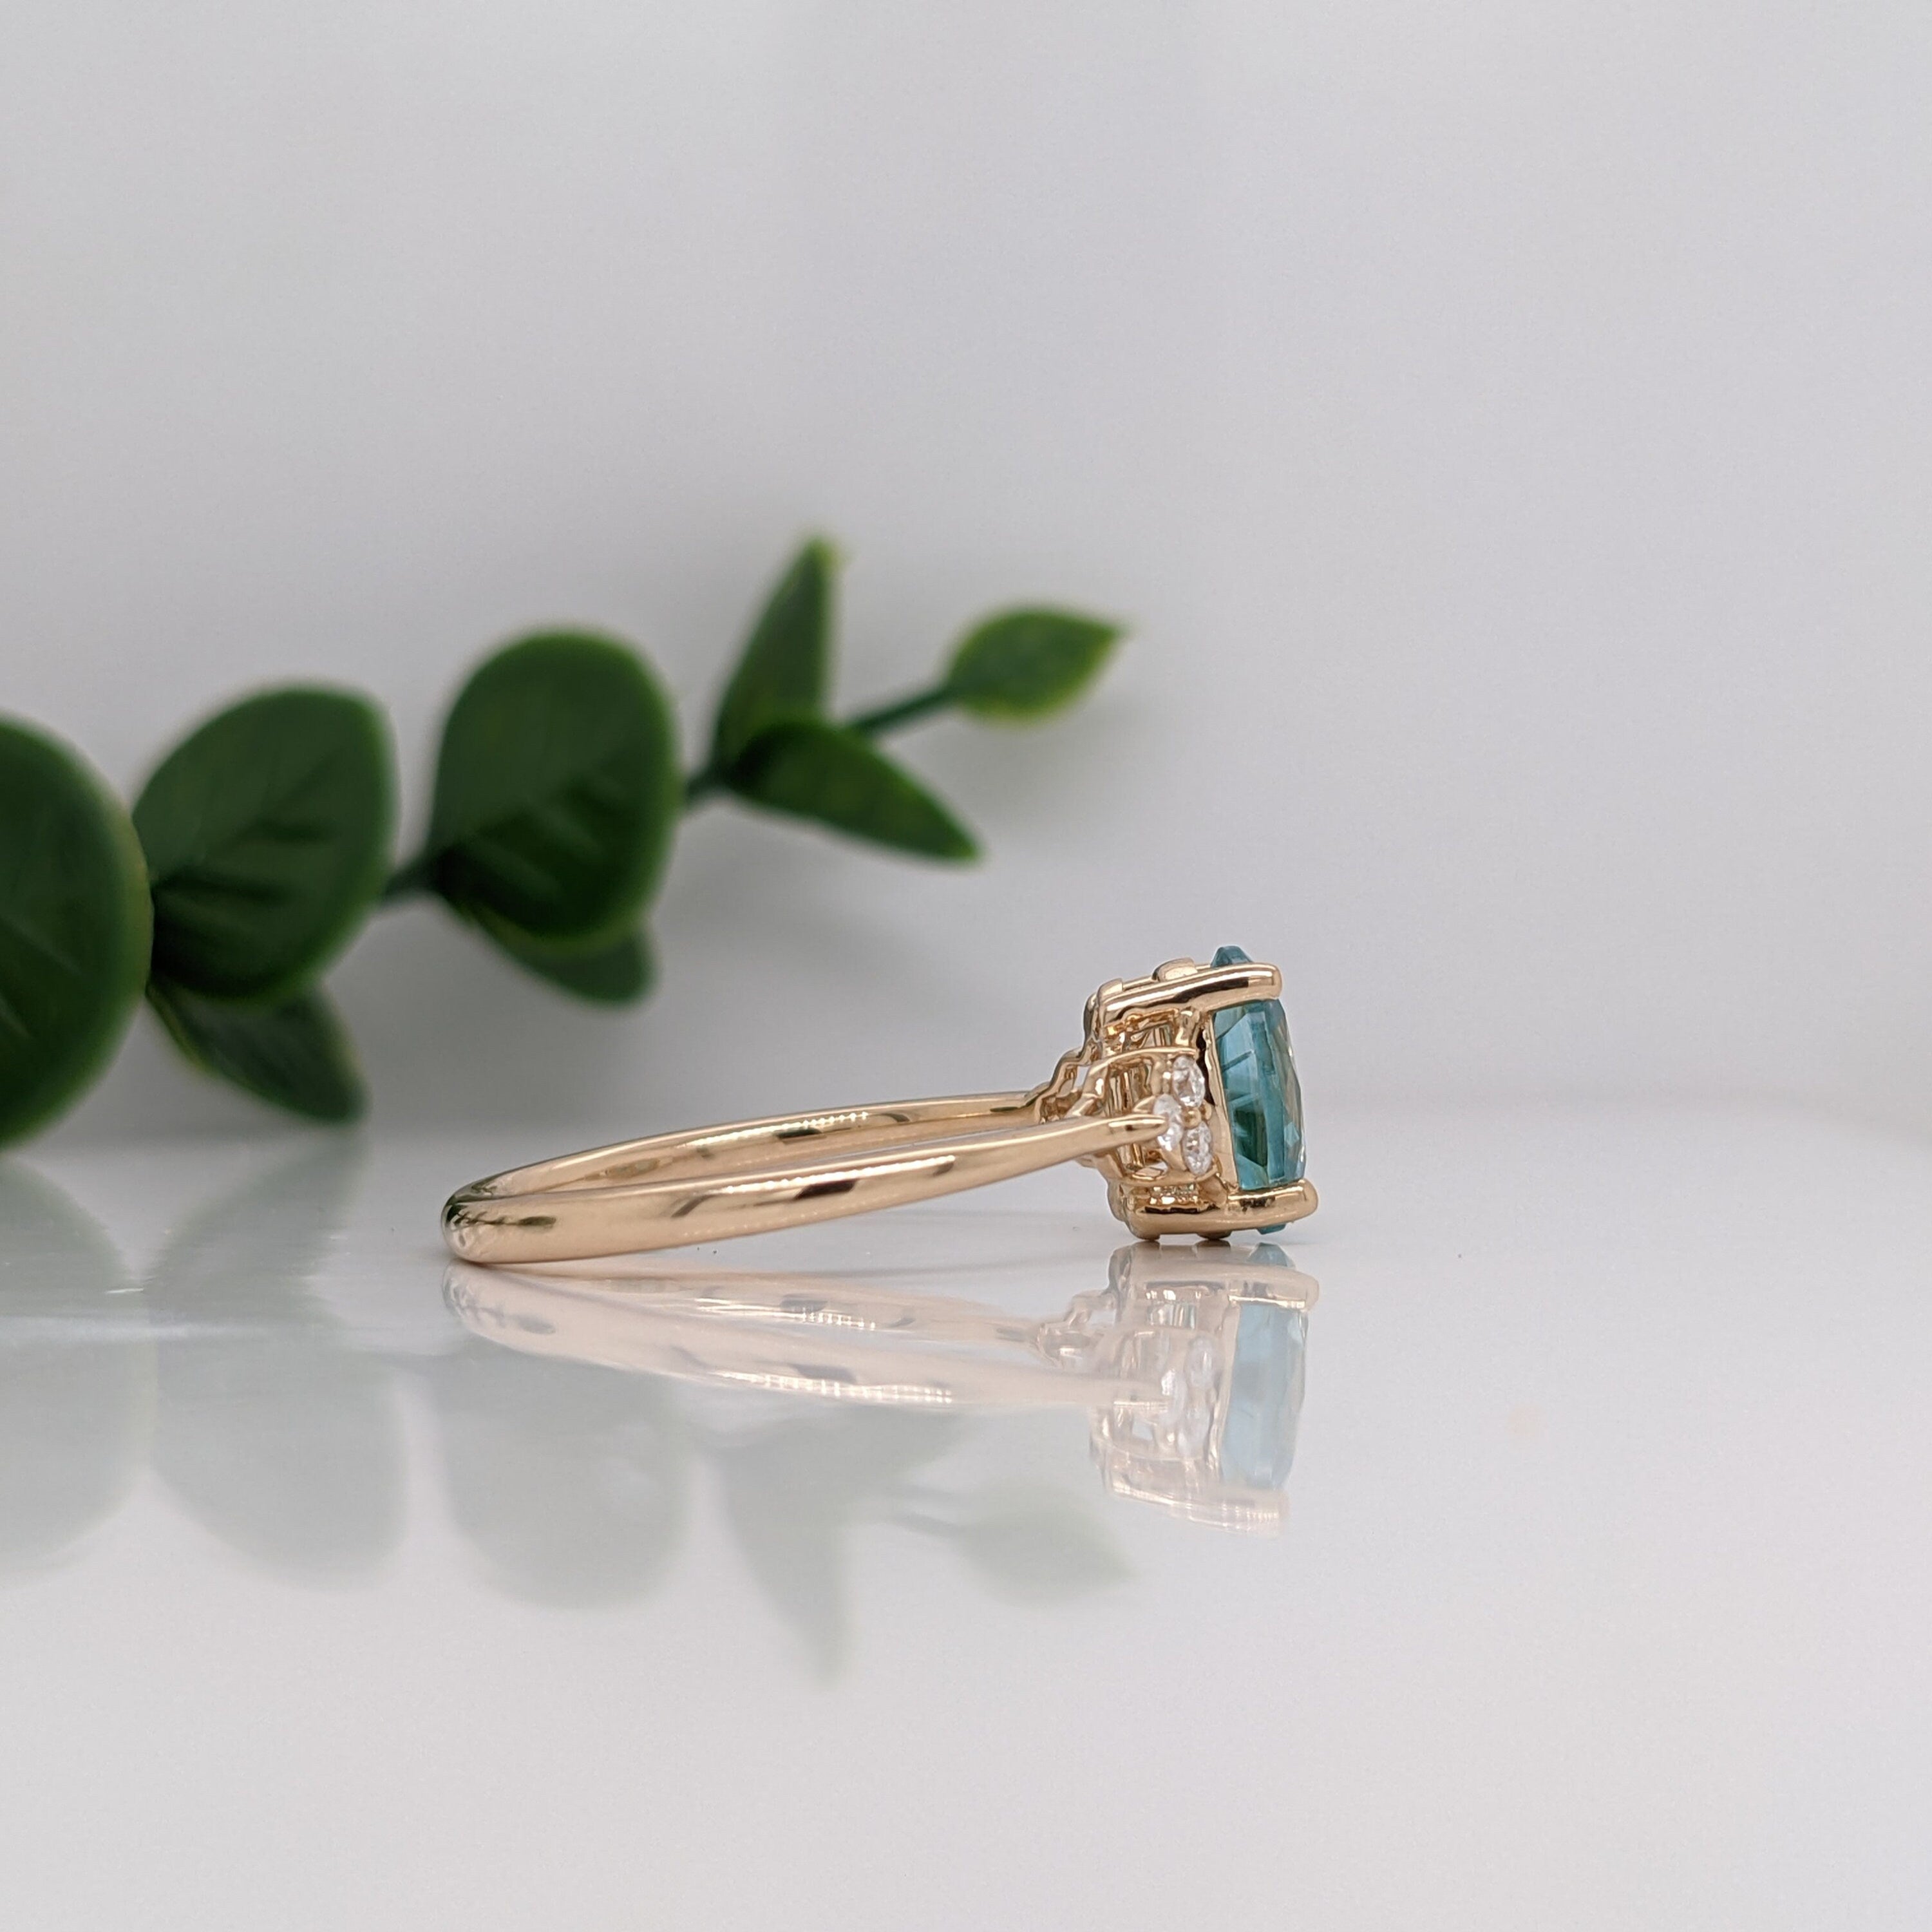 Dazzling Natural Blue Zircon Ring in 14K Gold w Natural Diamond Accent Halo | Oval 8x6mm | Split Shank | December Birthstone Ring